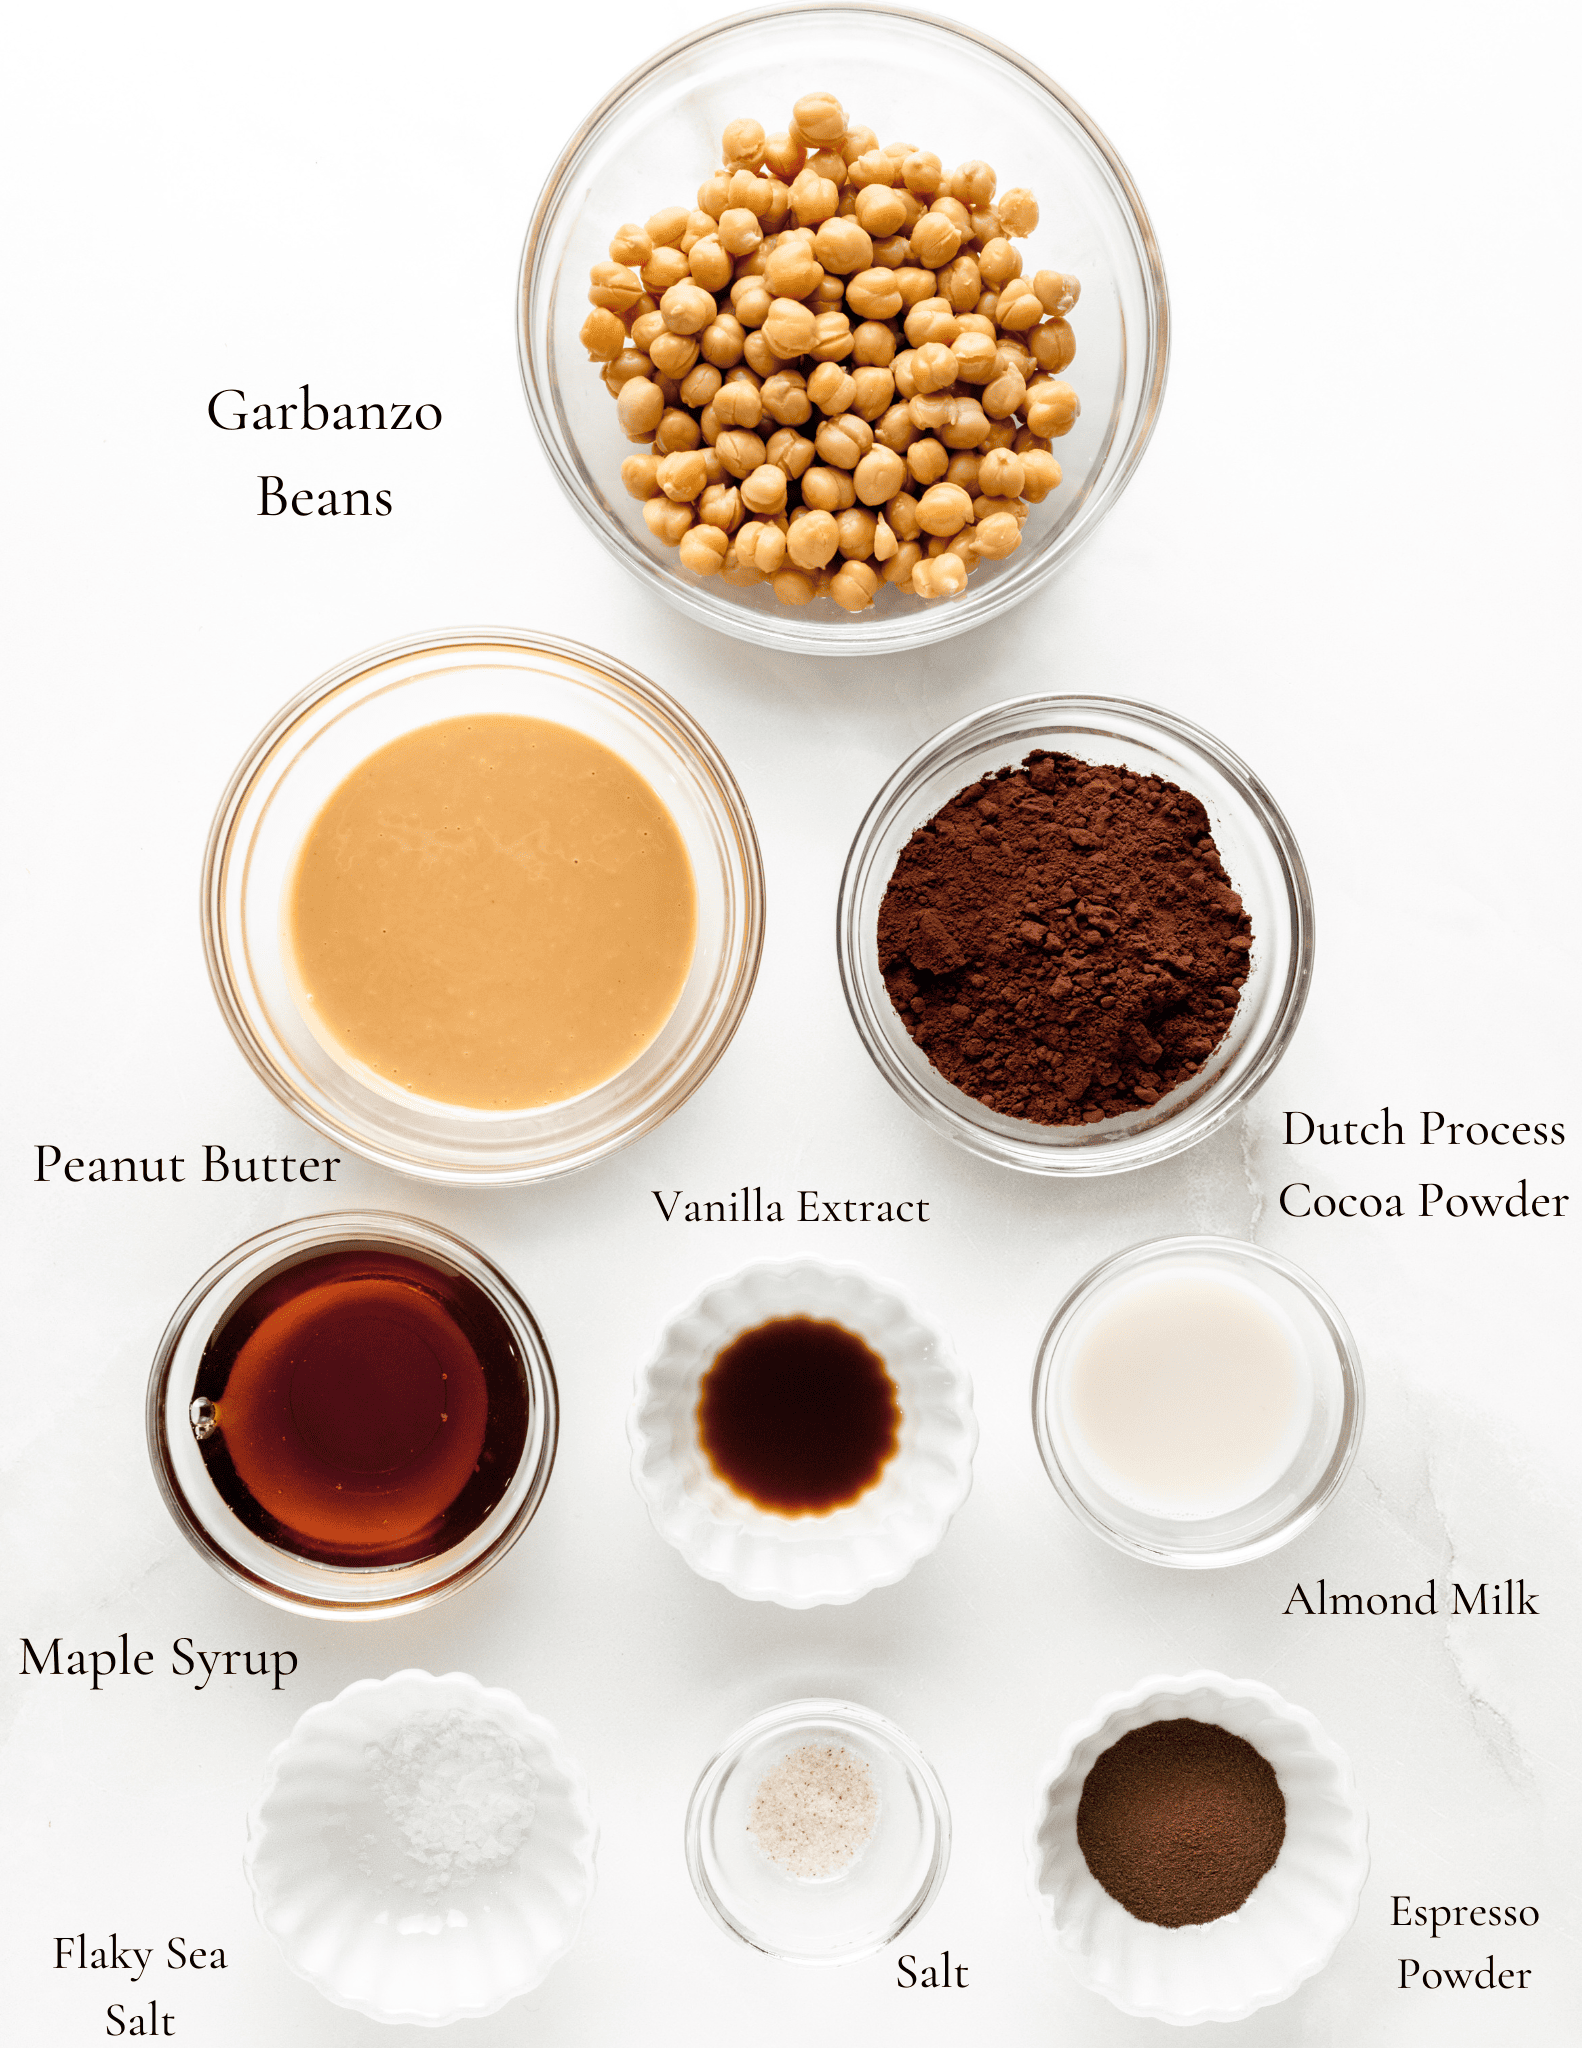 Picture of dark chocolate hummus ingredients, including a bowl of garbanzo beans, dark dutch process cocoa powder, peanut butter, vanilla extract, maple syrup, almond milk, espresso powder, salt, and flaky sea salt. 